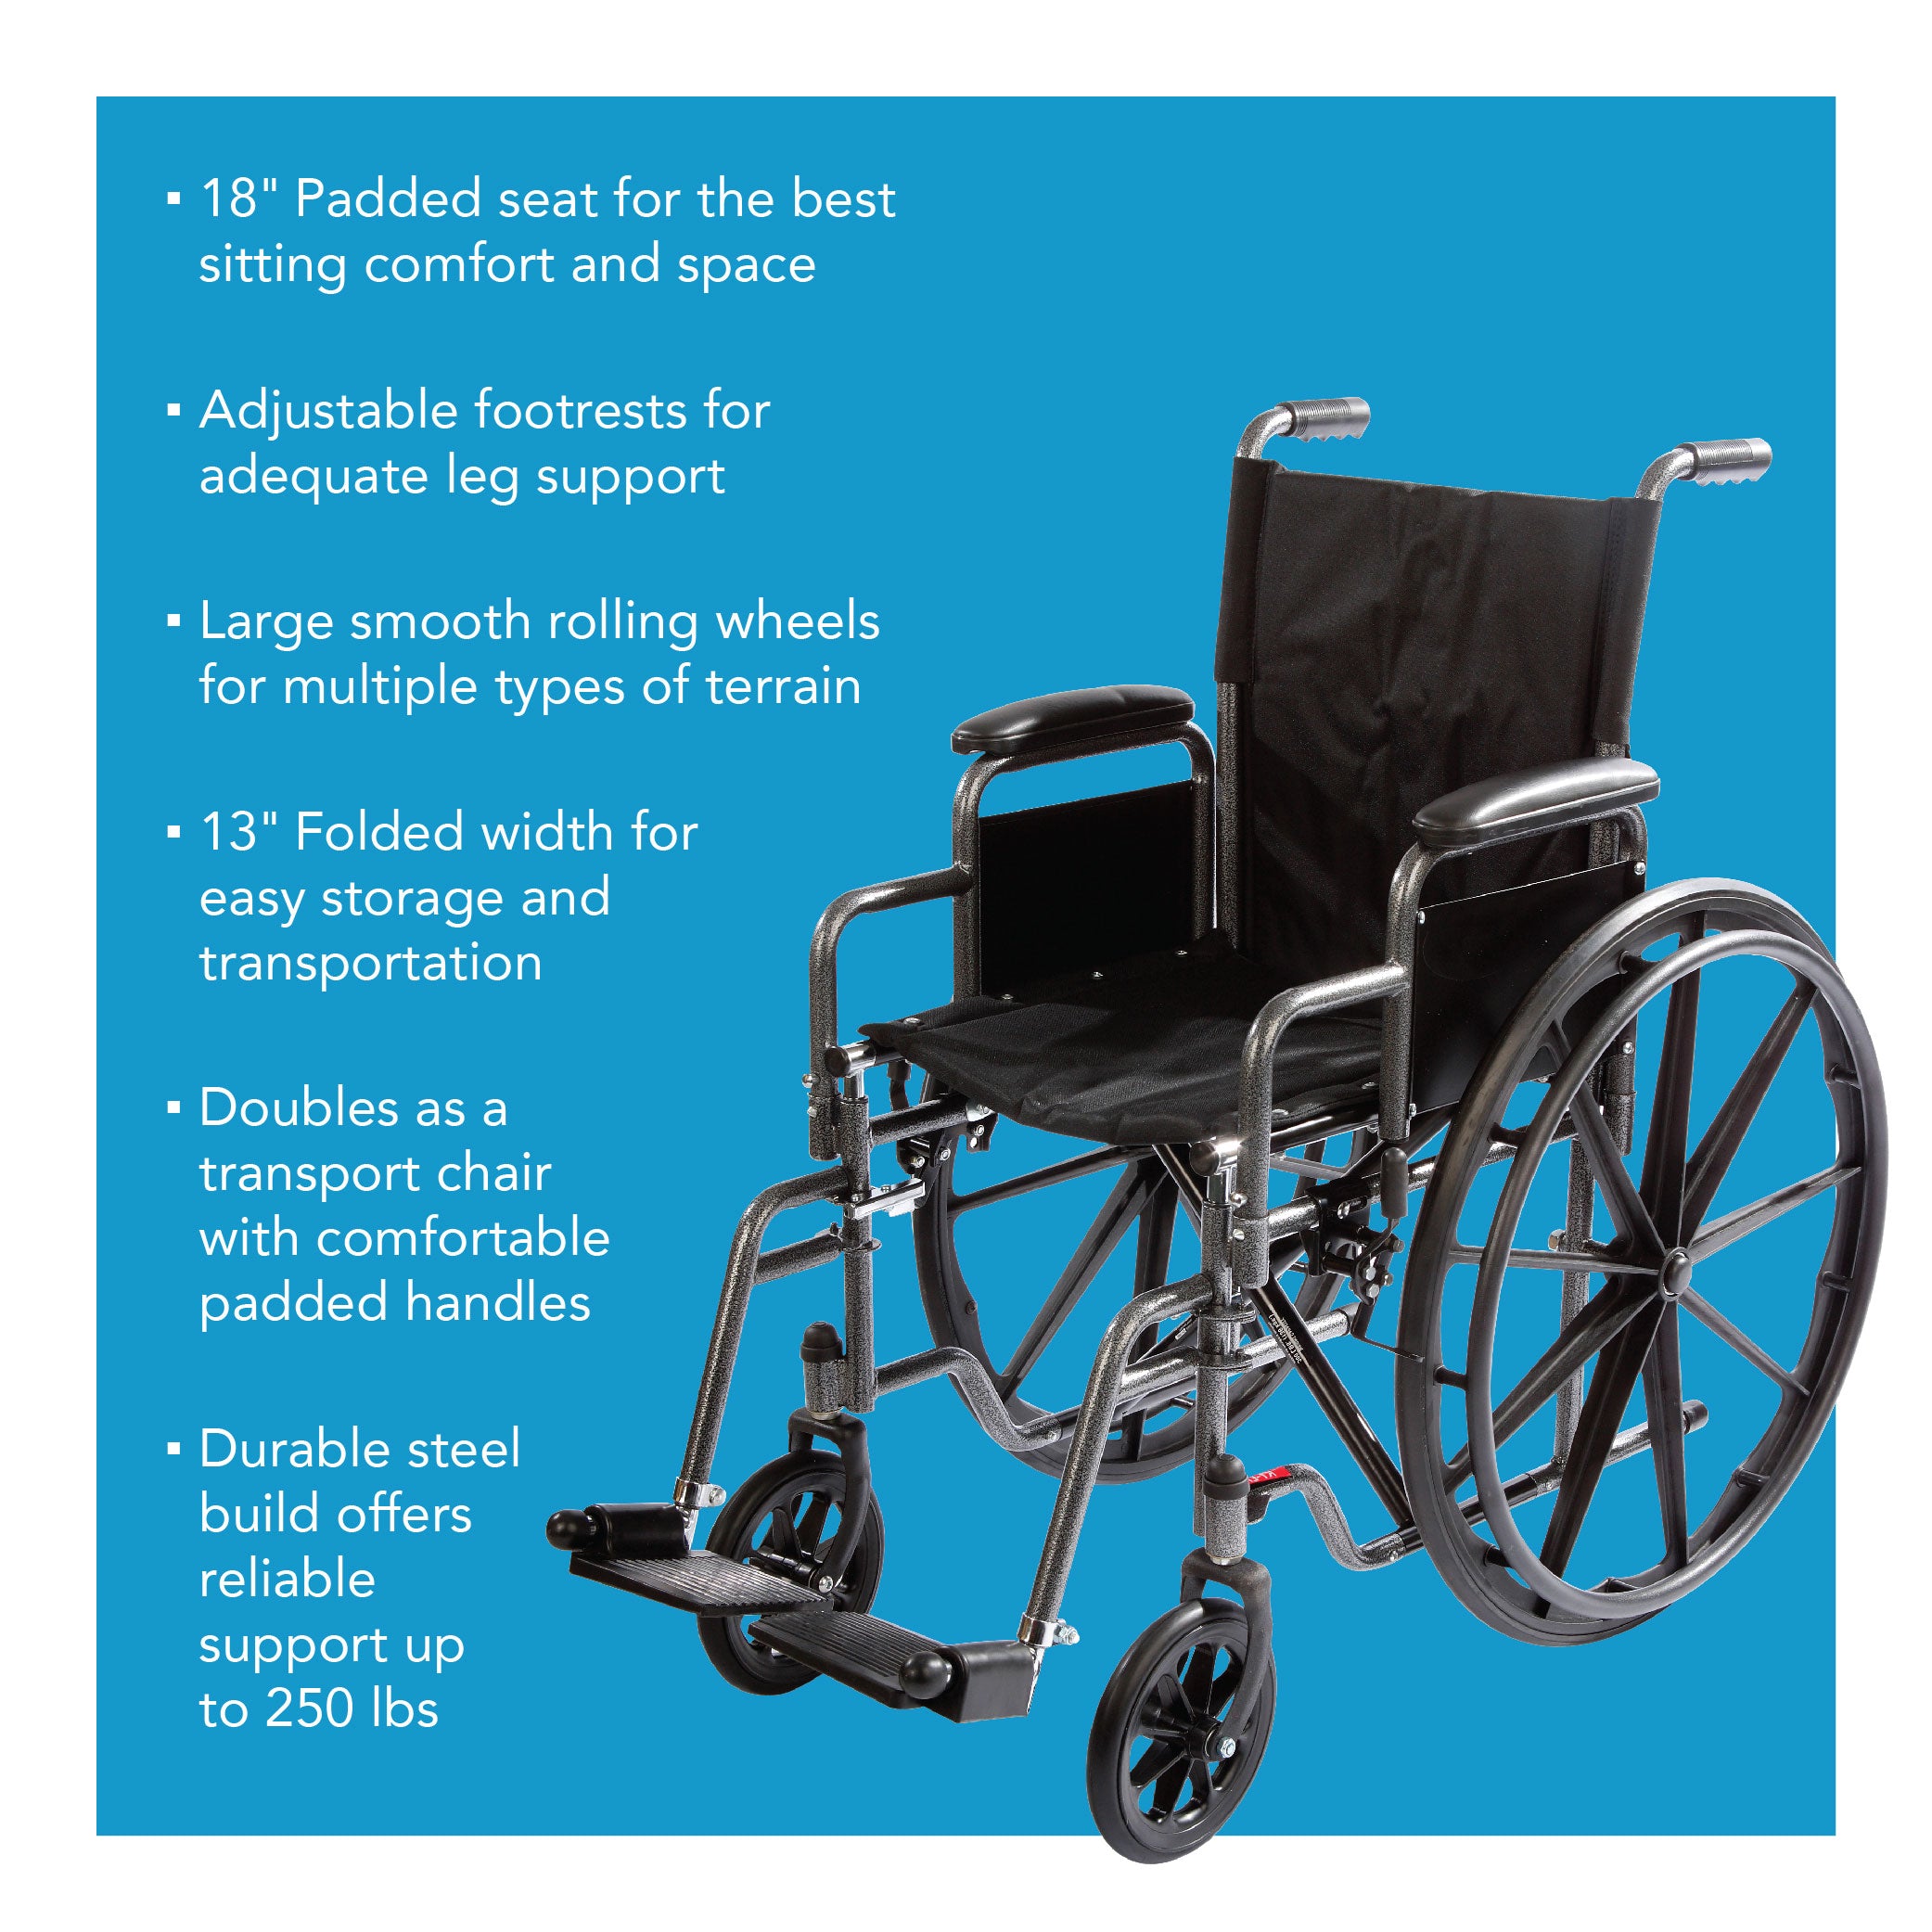 Carex Wheelchair With Large 18” Padded Seat - Carex Health Brands